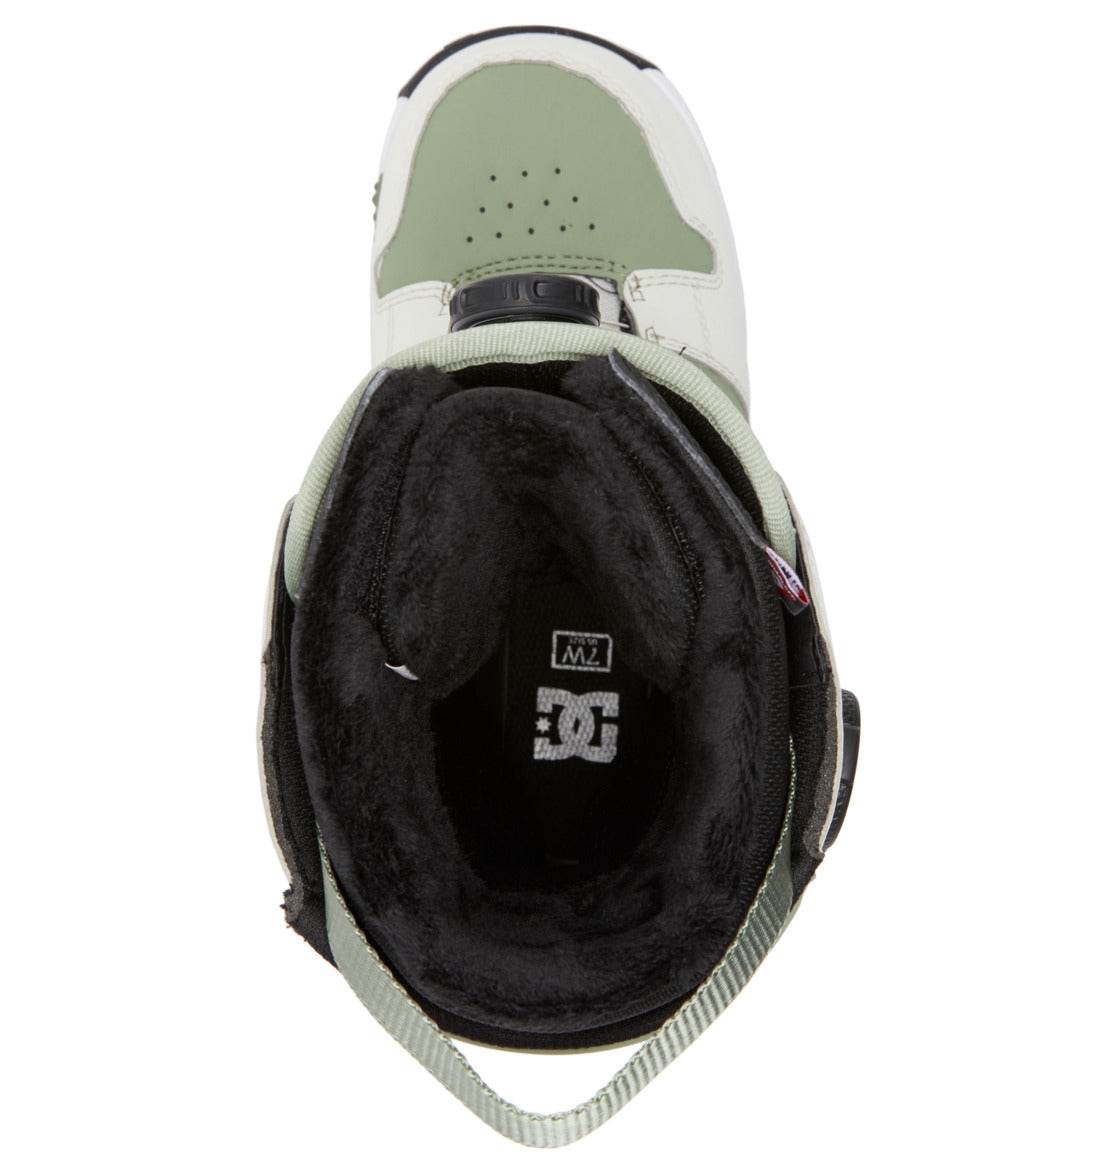 Women&#39;s Phase Pro BOA® Snowboard Boots - DC Shoes